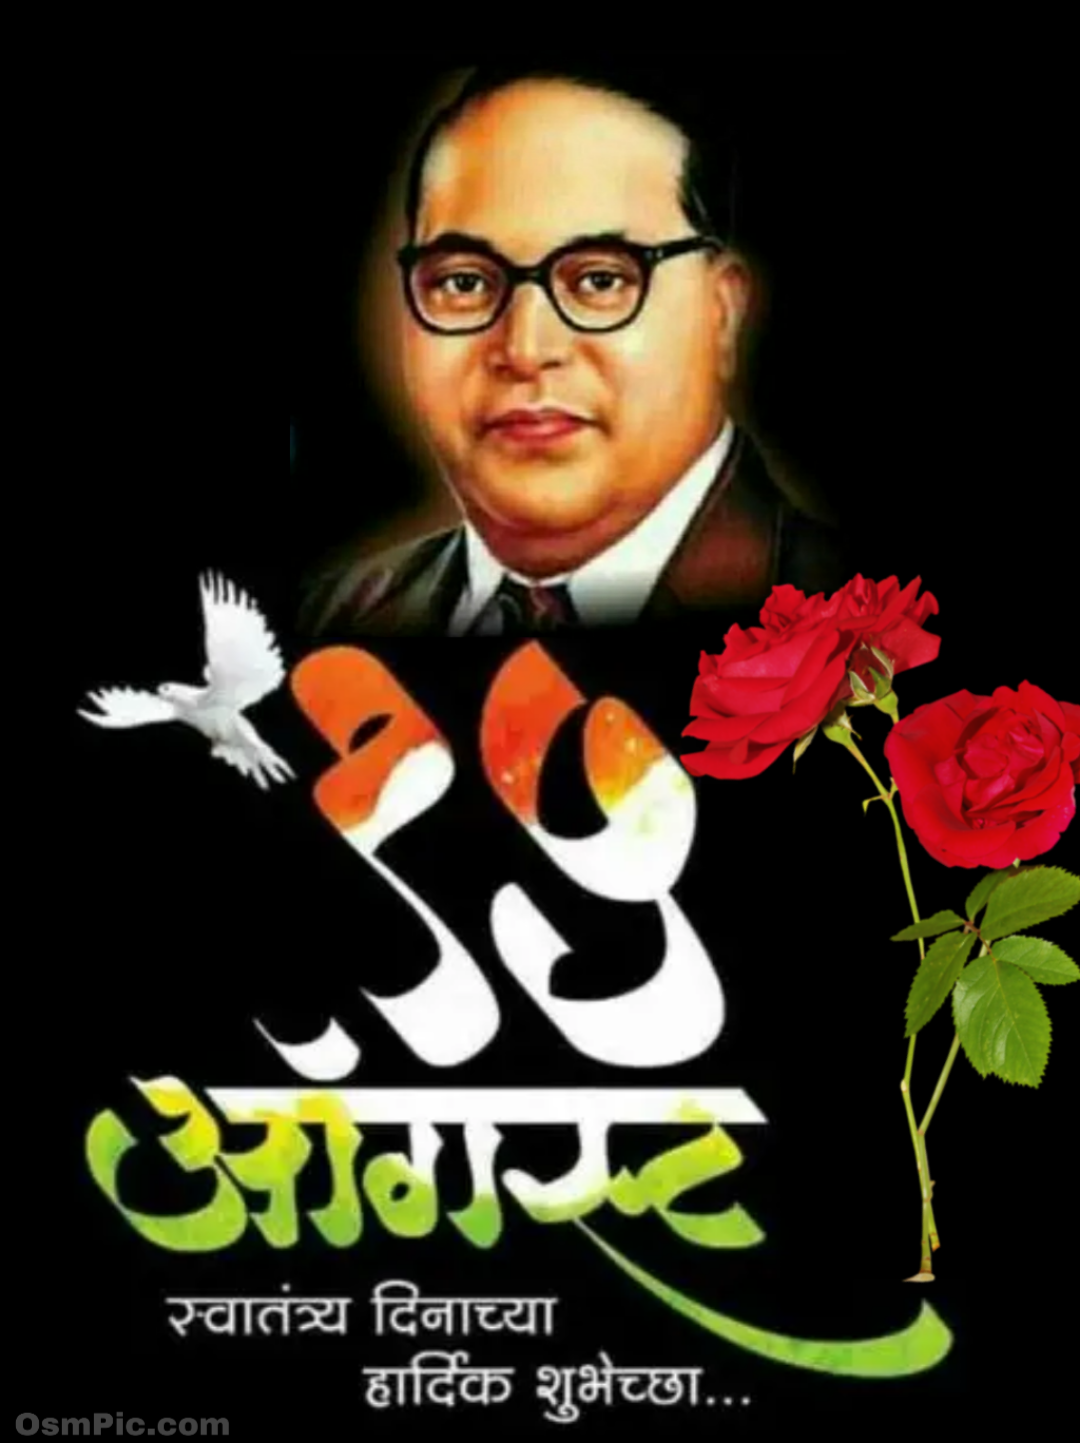 Babasaheb Ambedkar Indian Flag Images For 15 August & 26 January